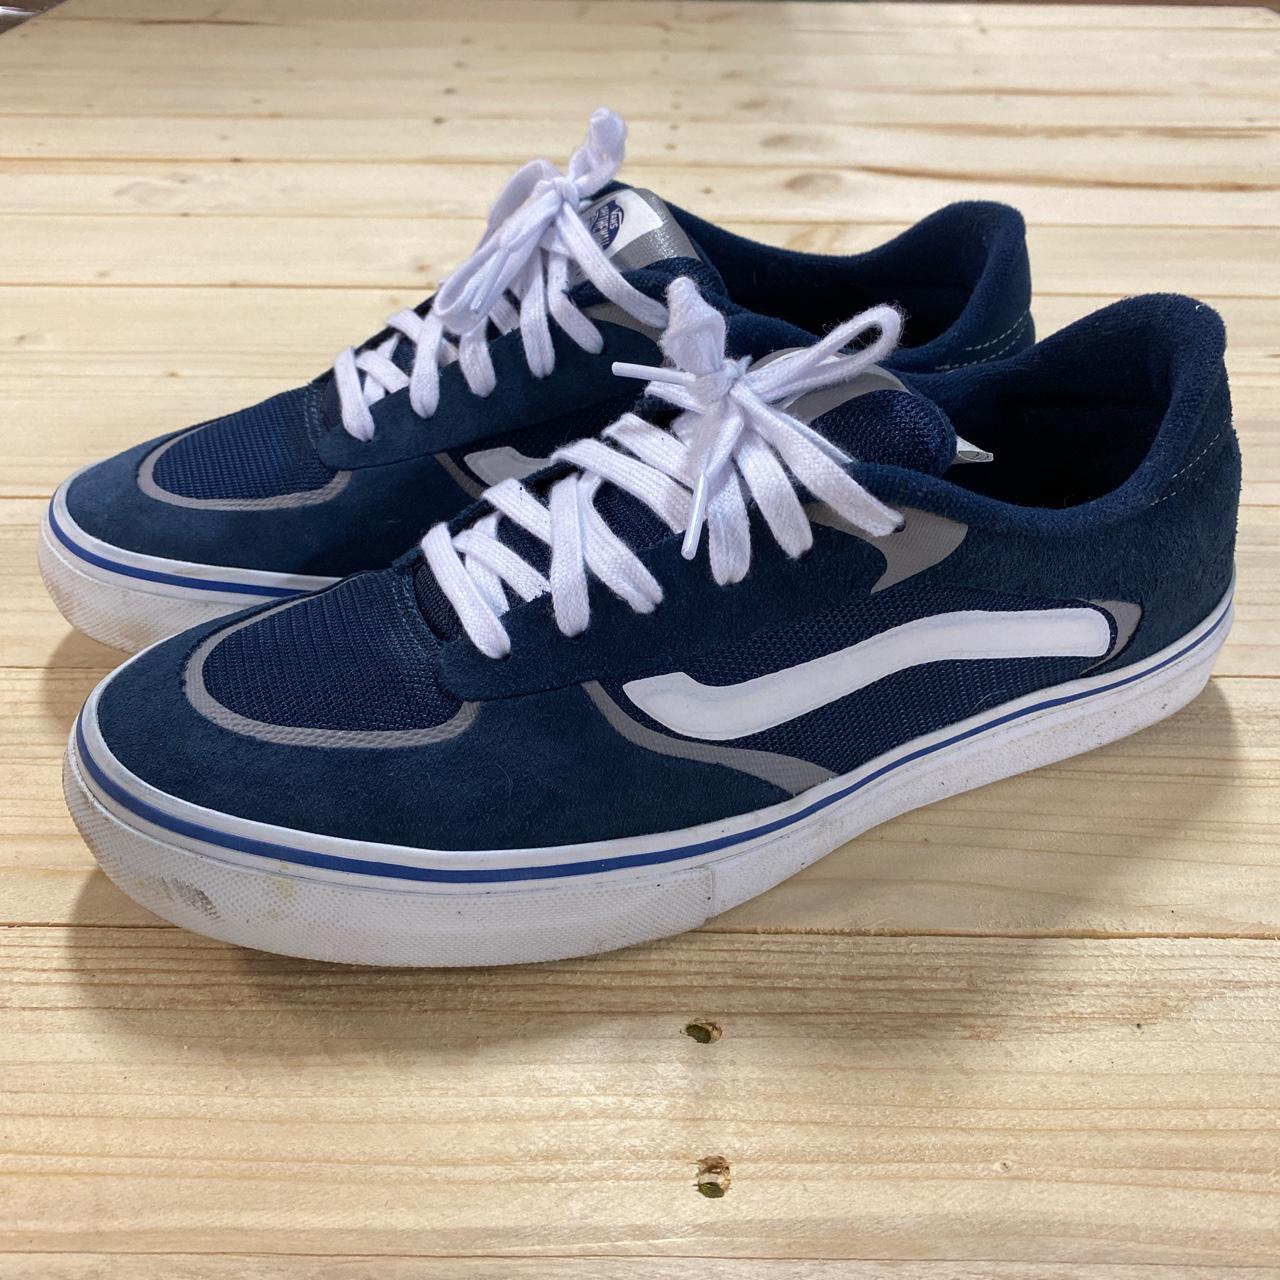 Vans Men's Blue and White Trainers (2)